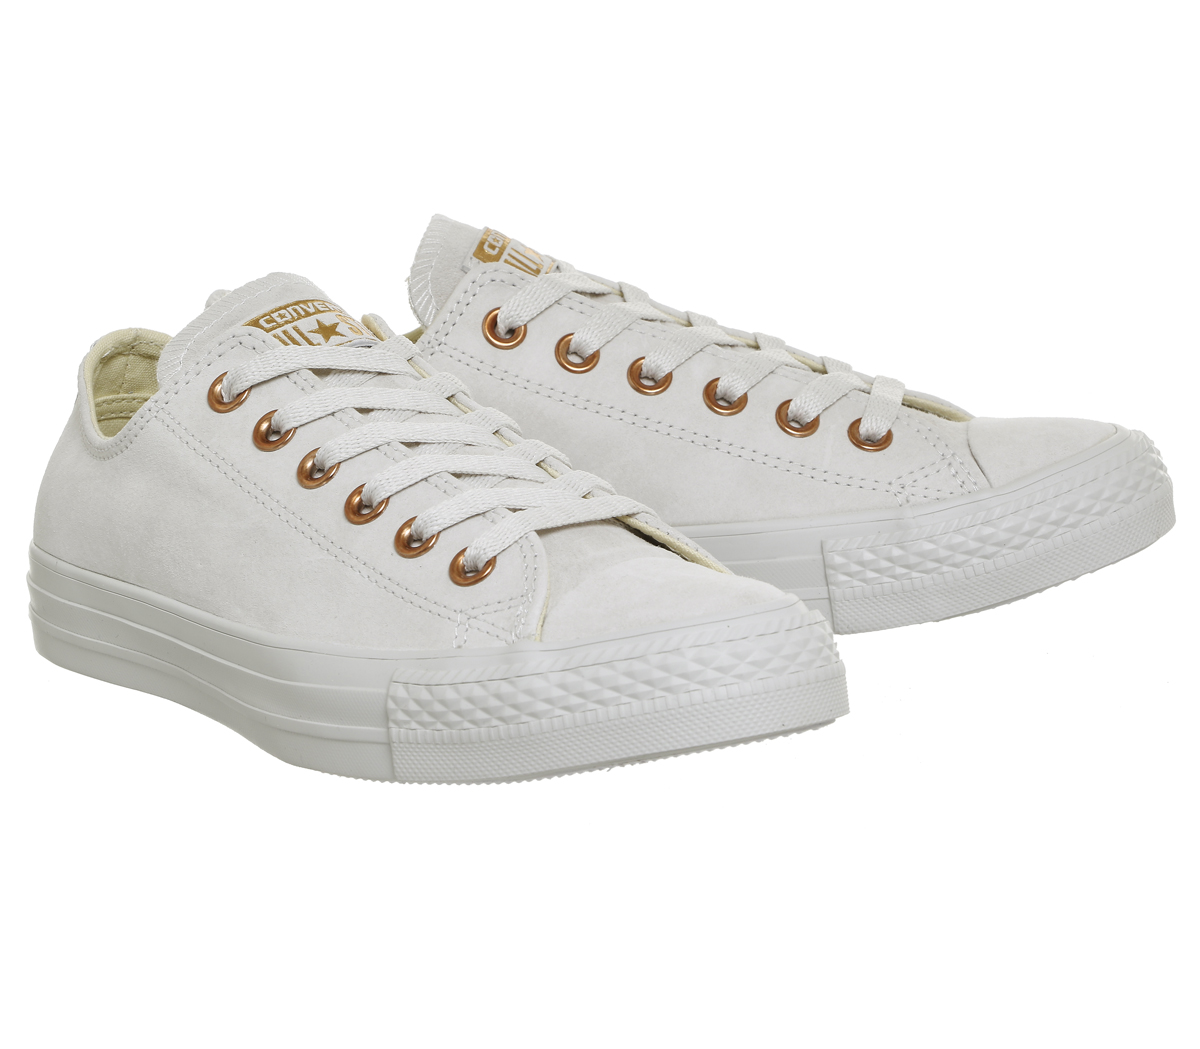 white leather rose gold converse